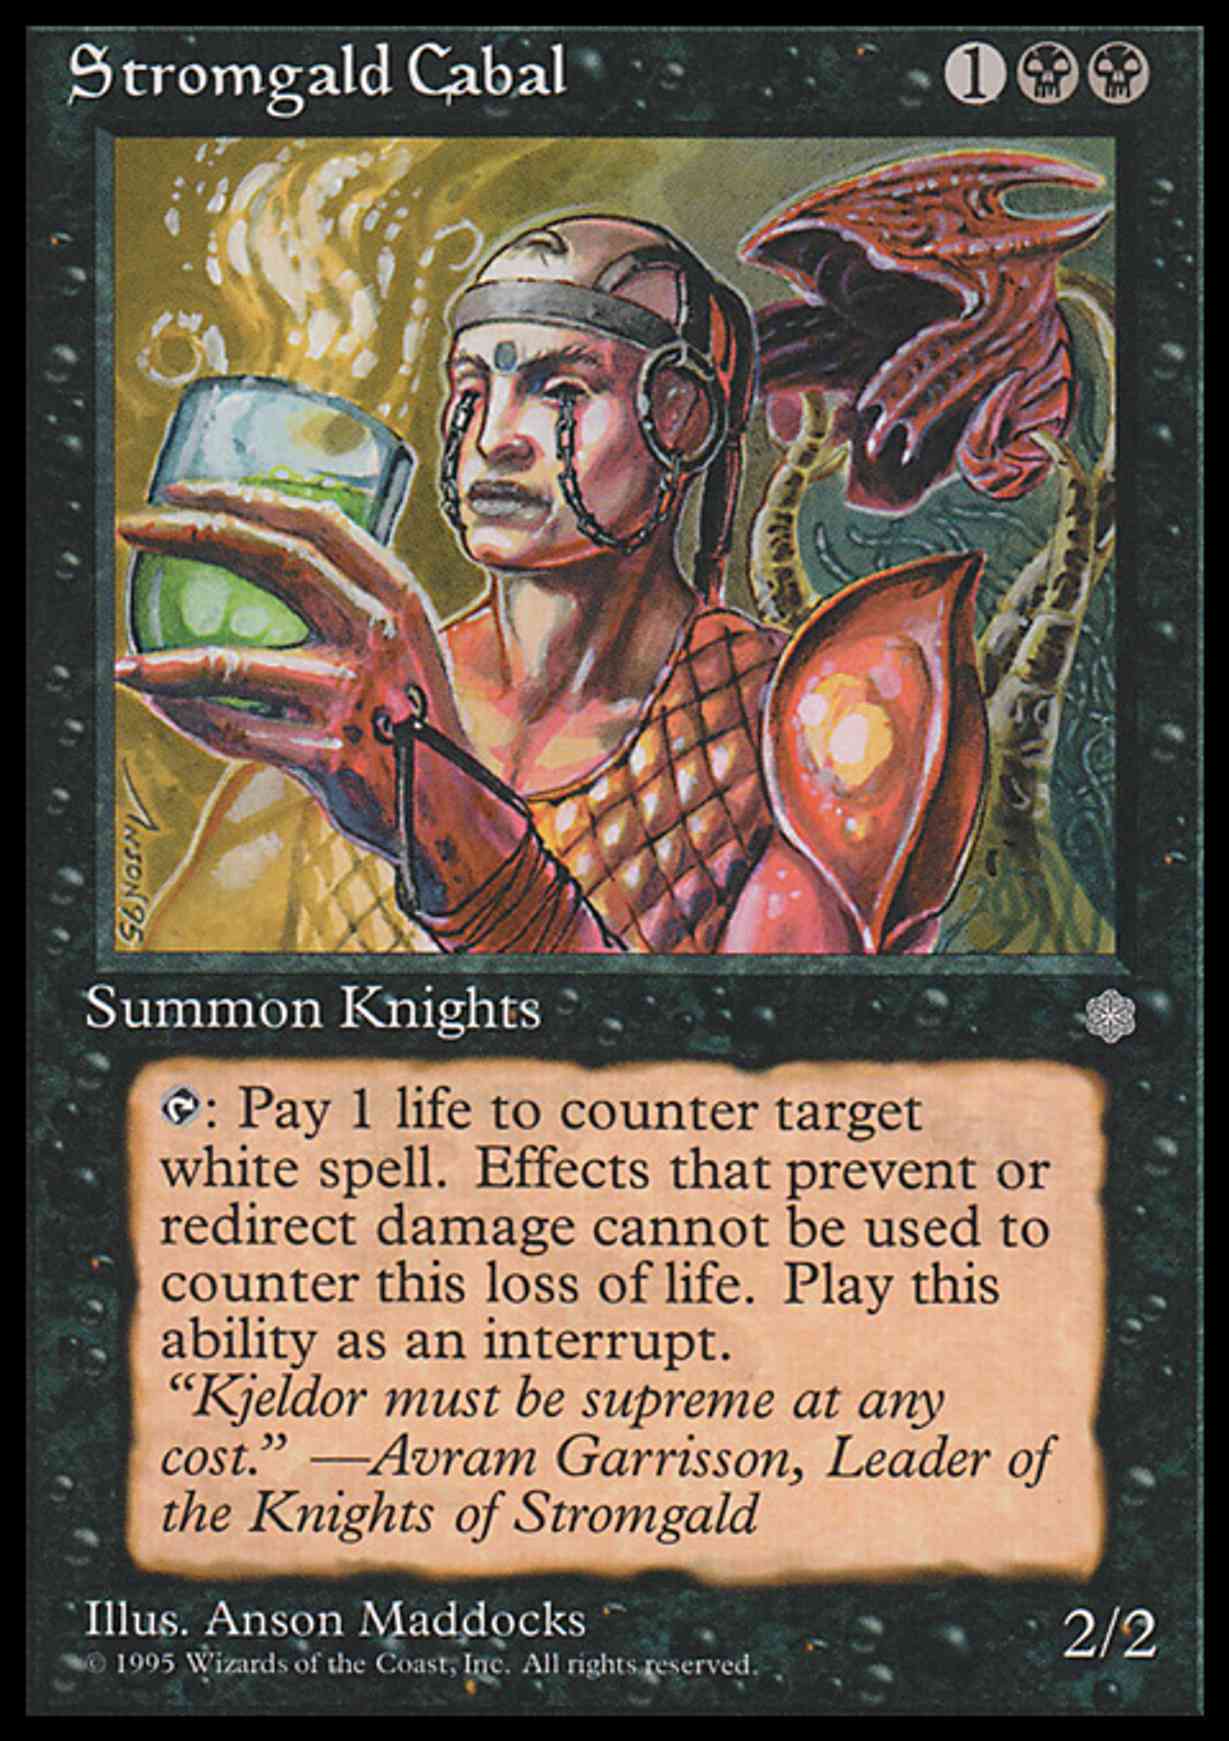 Stromgald Cabal magic card front